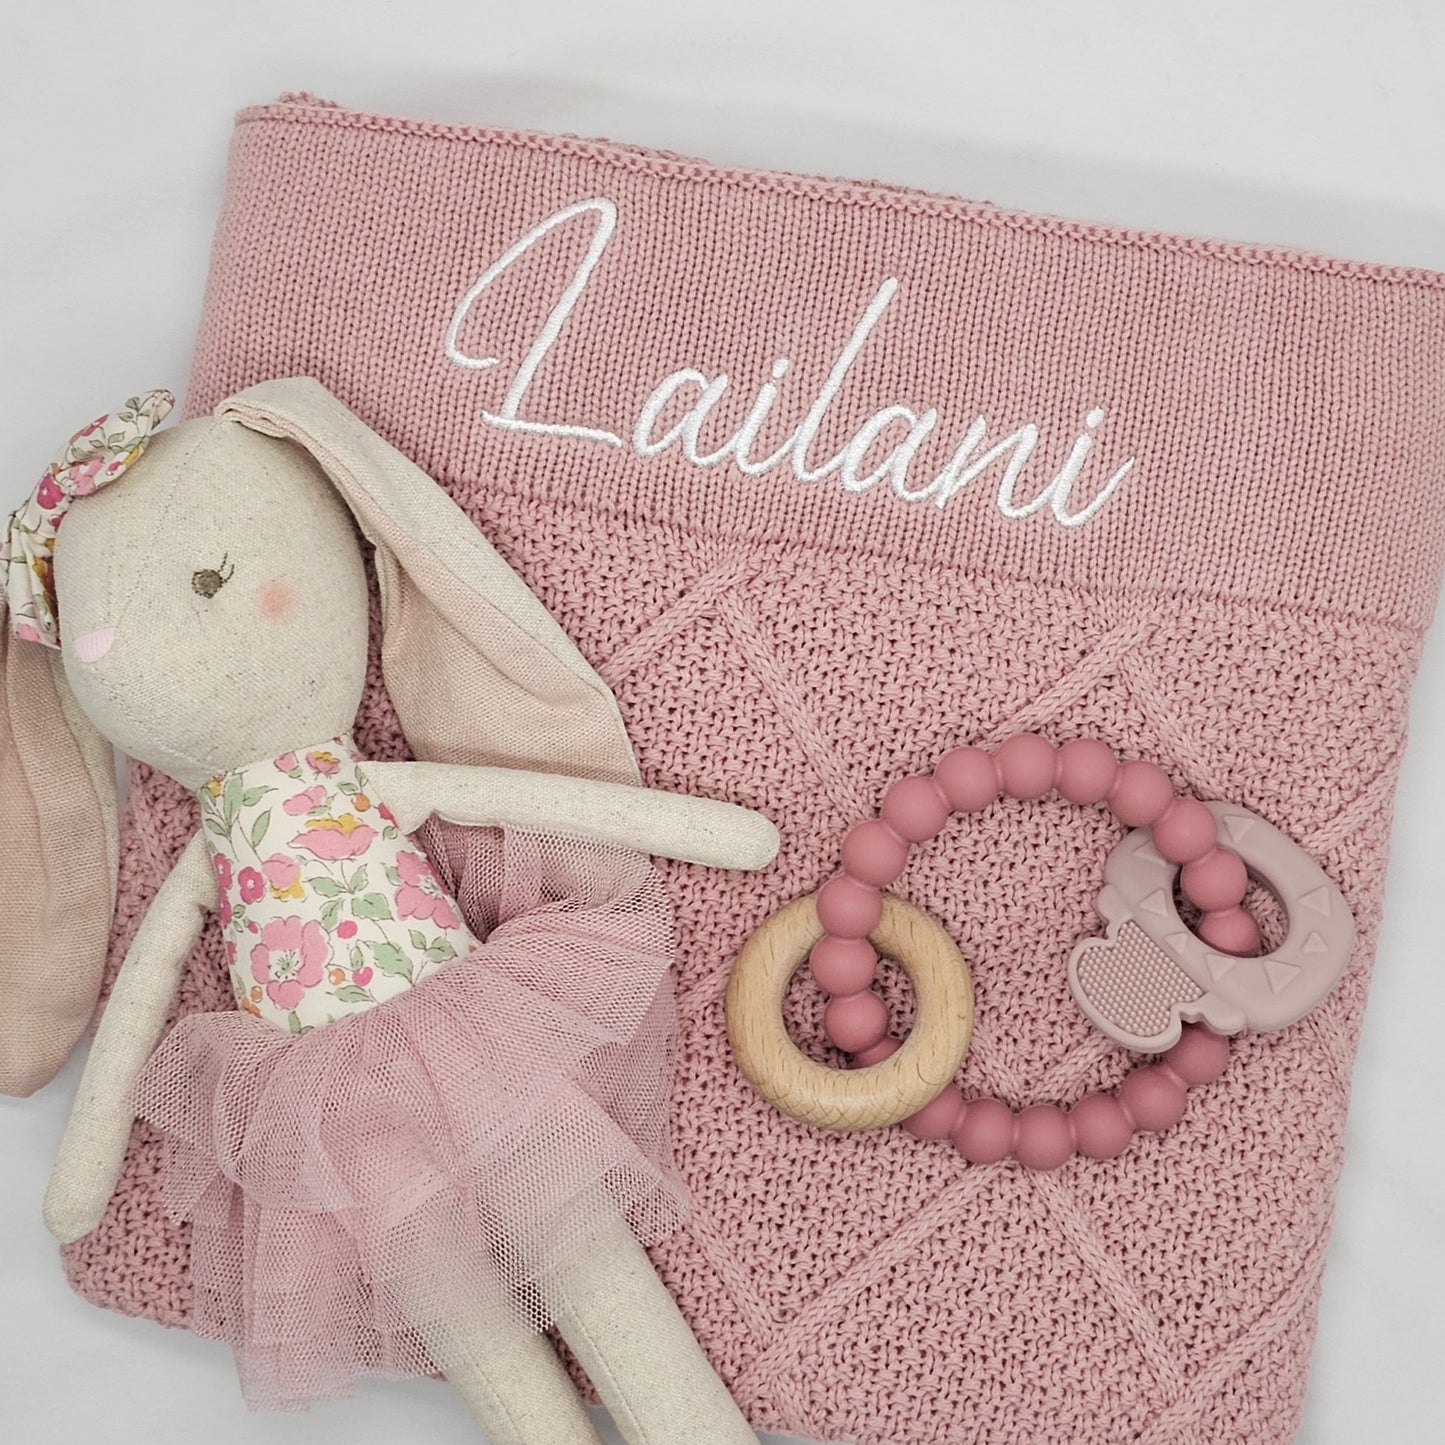 Dusty Pink diamond knit blanket with bunny and siicone teether